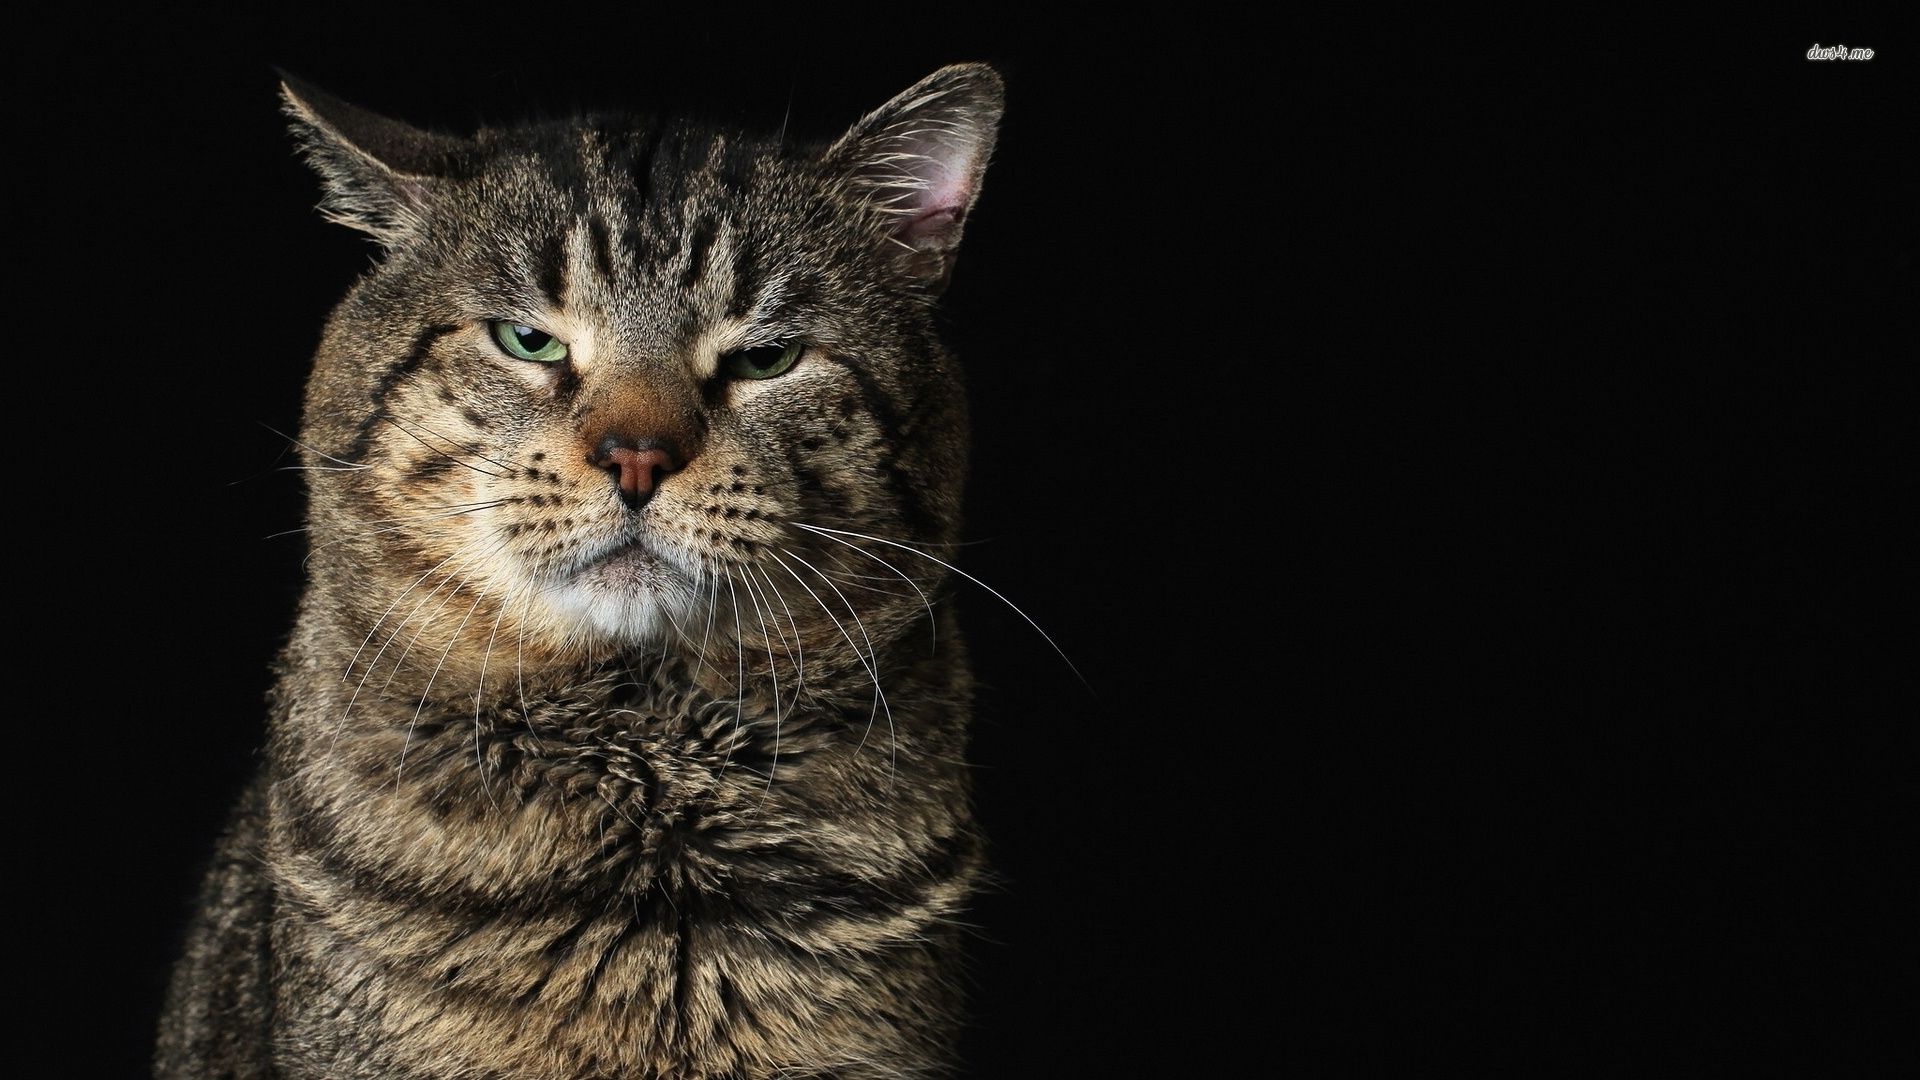 Angry cat wallpaper - Animal wallpapers -